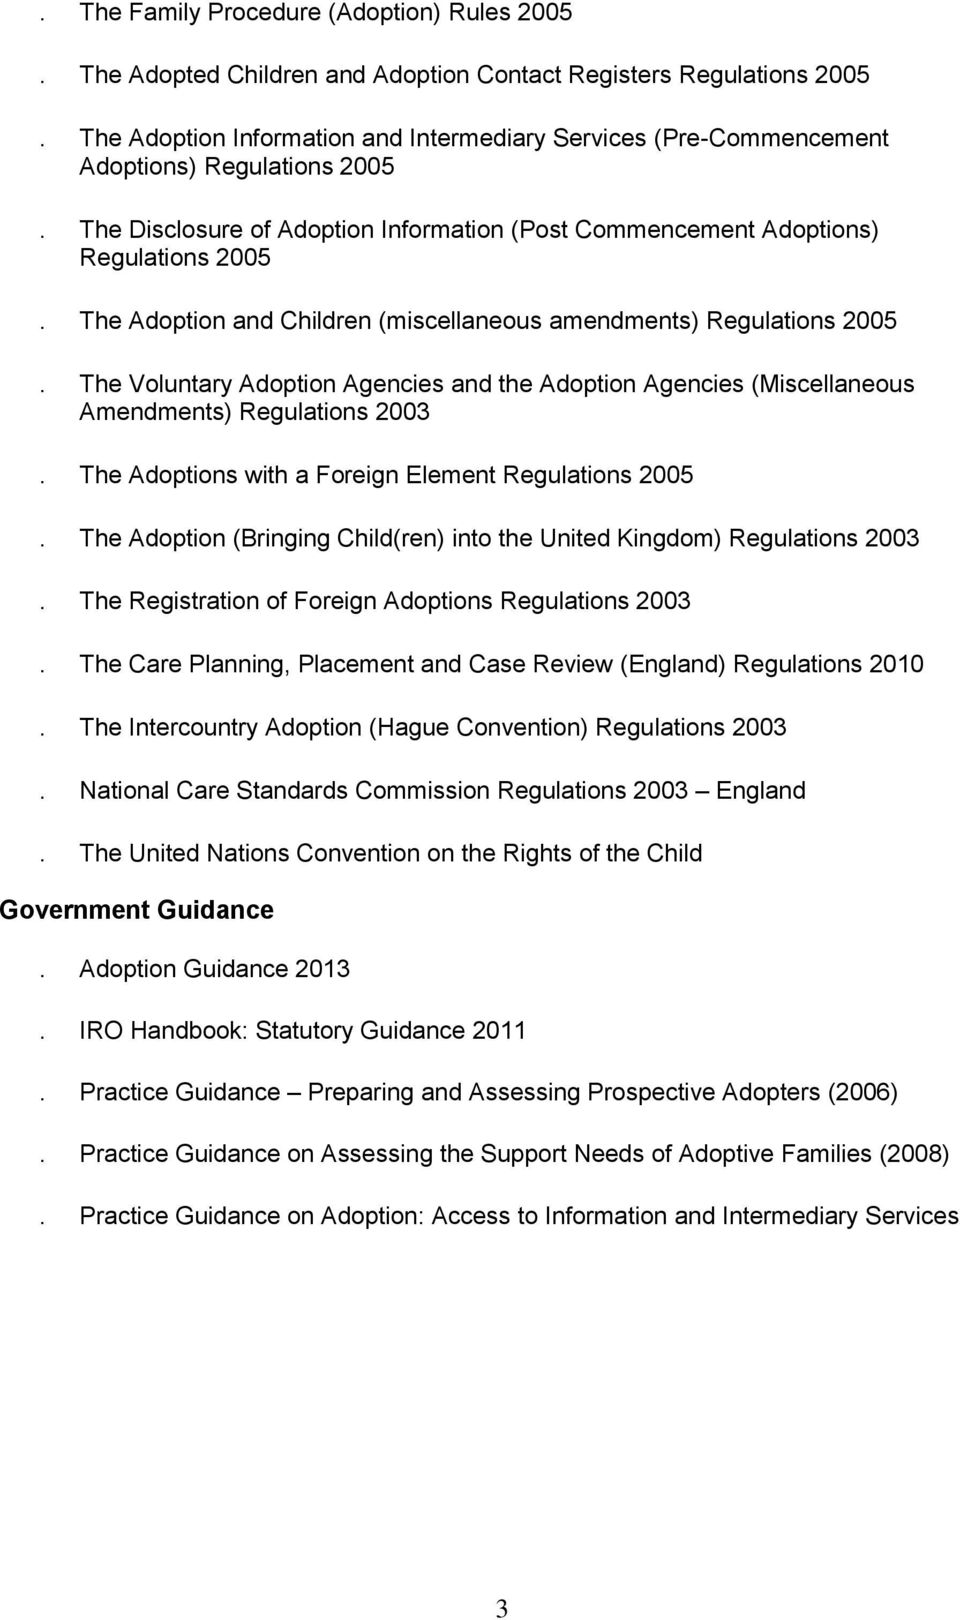 The Adoption and Children (miscellaneous amendments) Regulations 2005. The Voluntary Adoption Agencies and the Adoption Agencies (Miscellaneous Amendments) Regulations 2003.